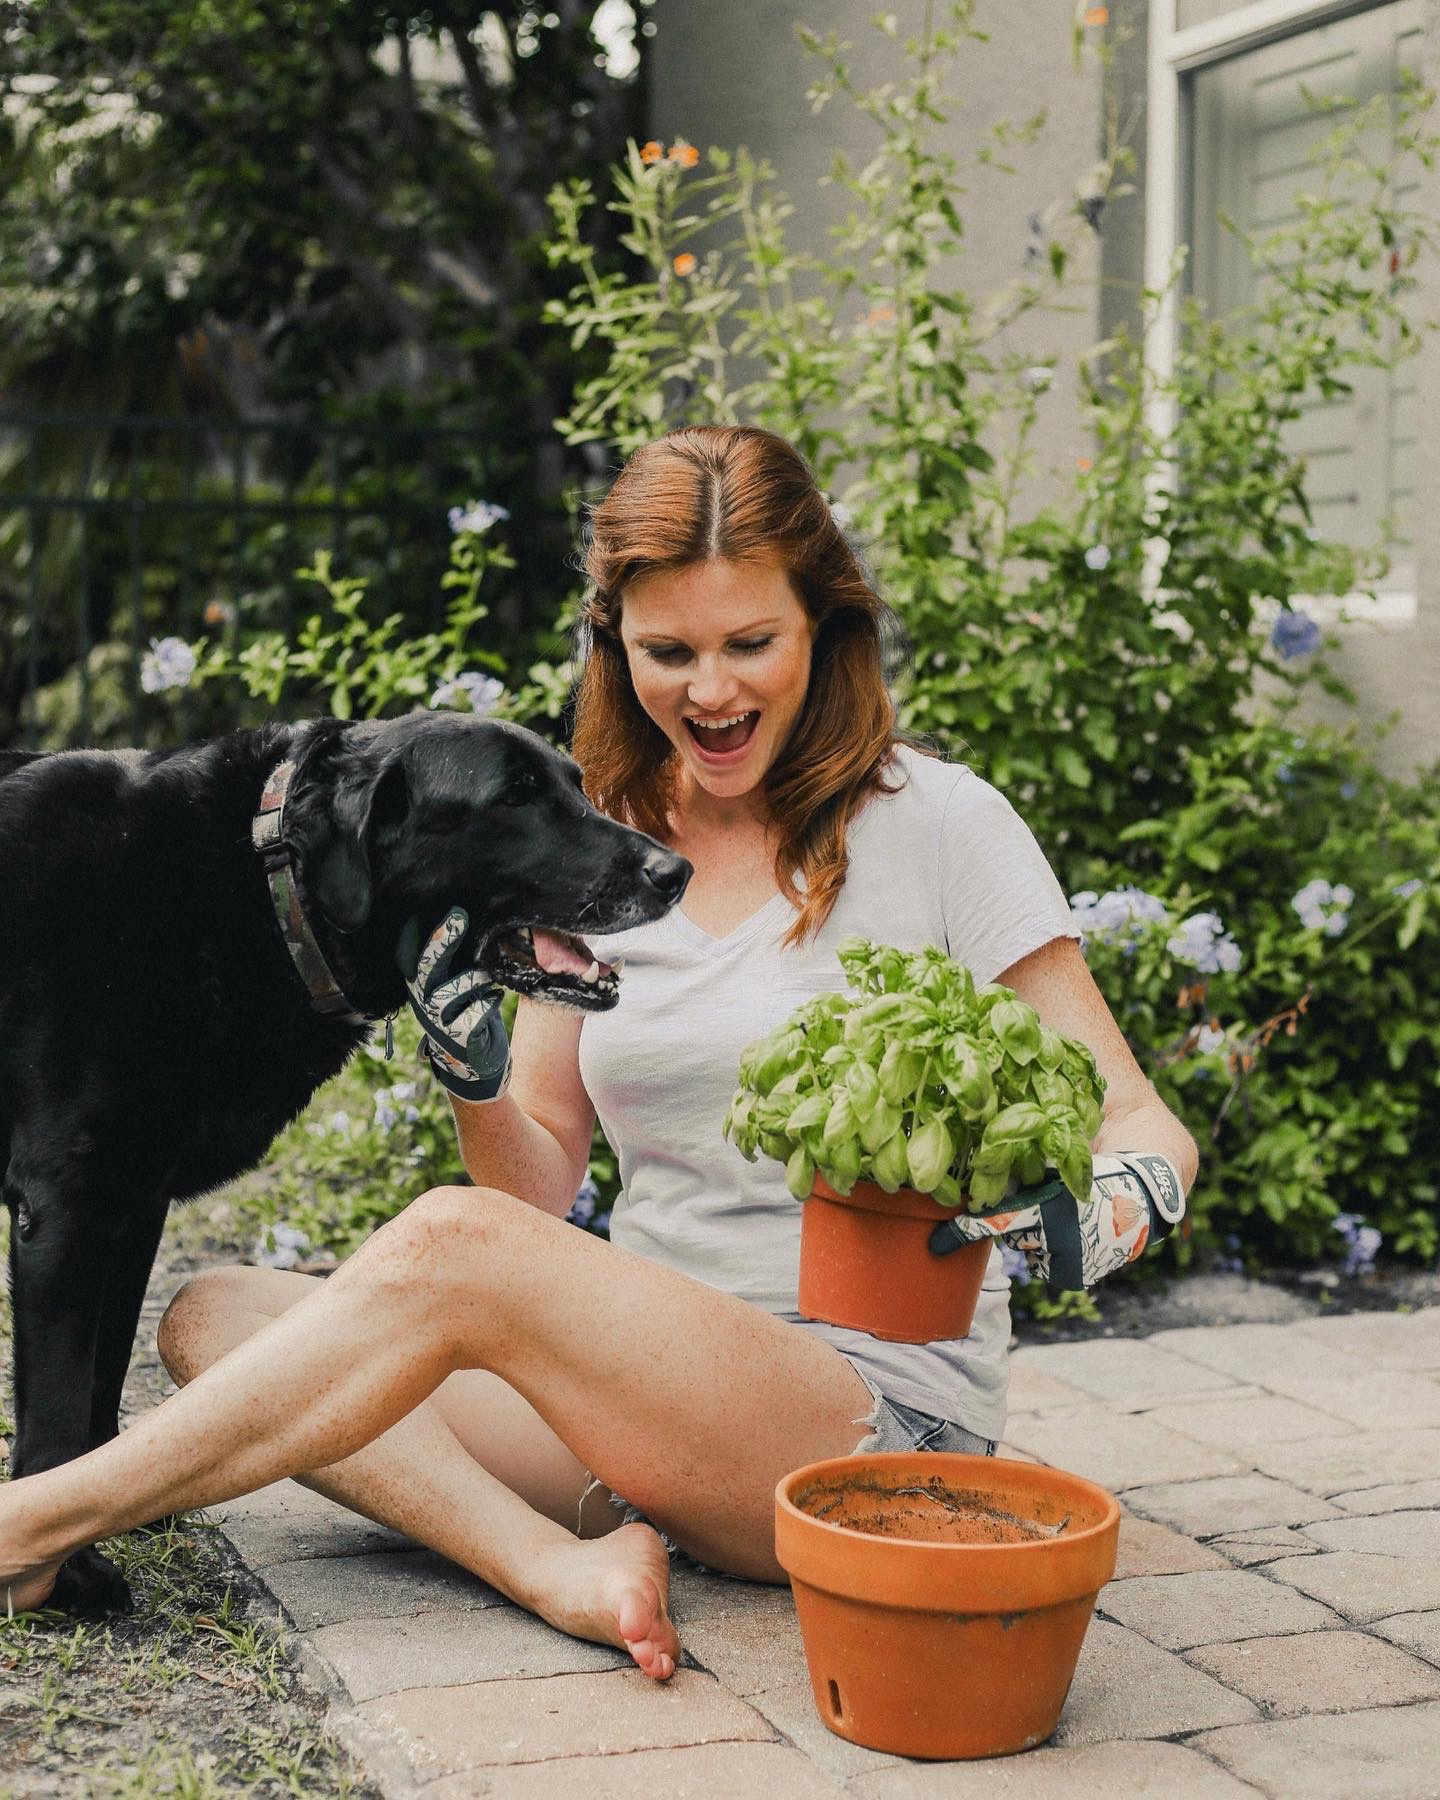 Lydia, her dog, and a basil plant